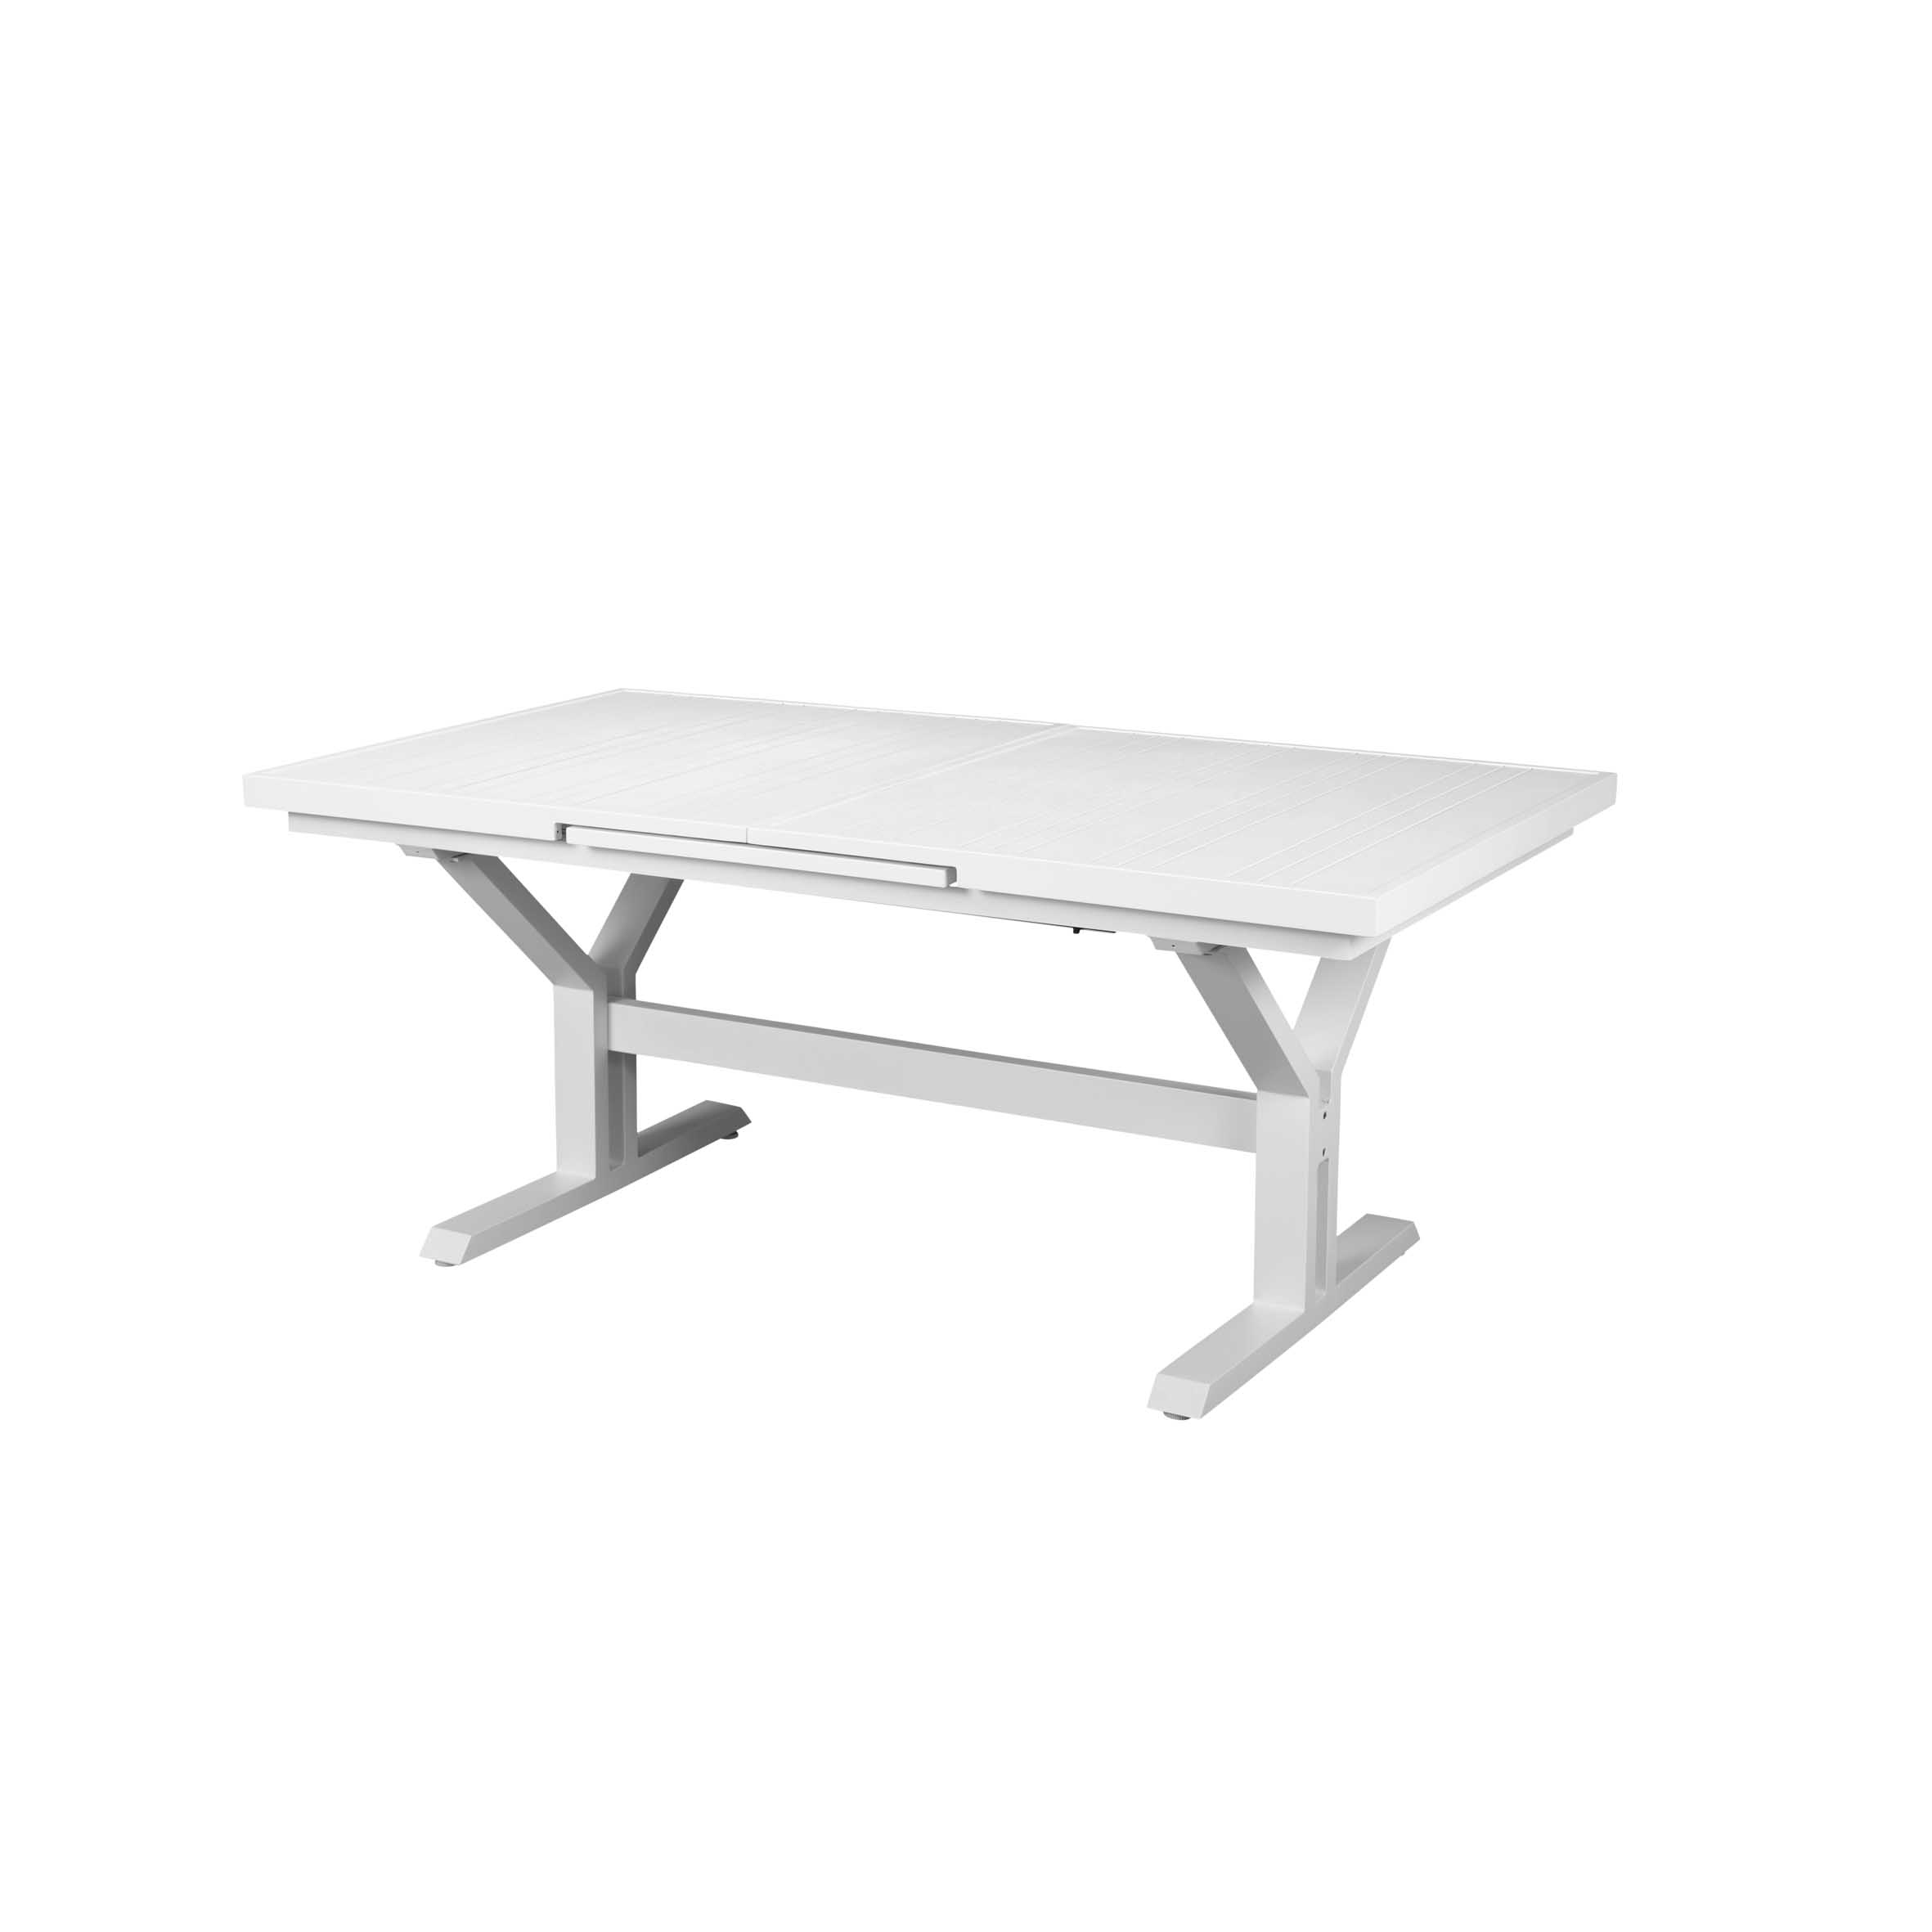 Tiffany outomatiese uitbreiding tafel S2